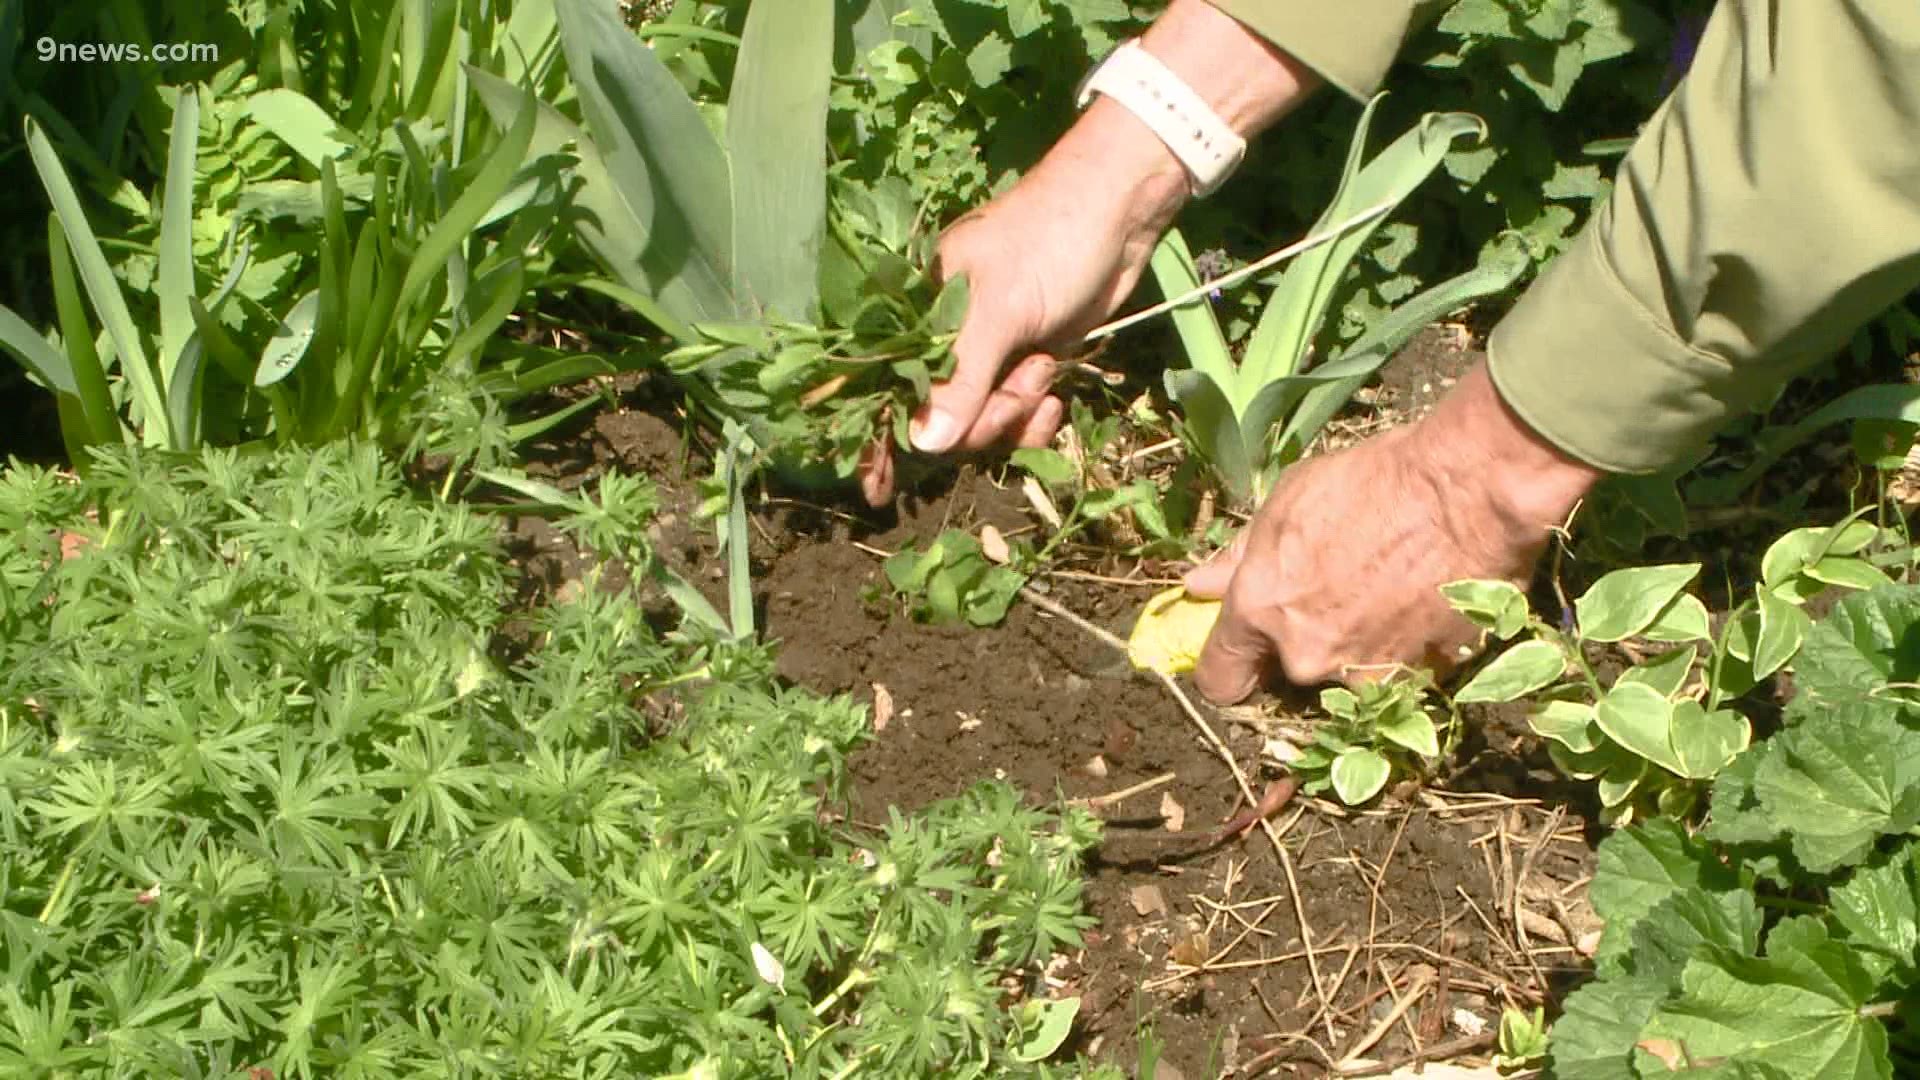 This wet weather mean it's a great time to pull the weeds out of your garden.